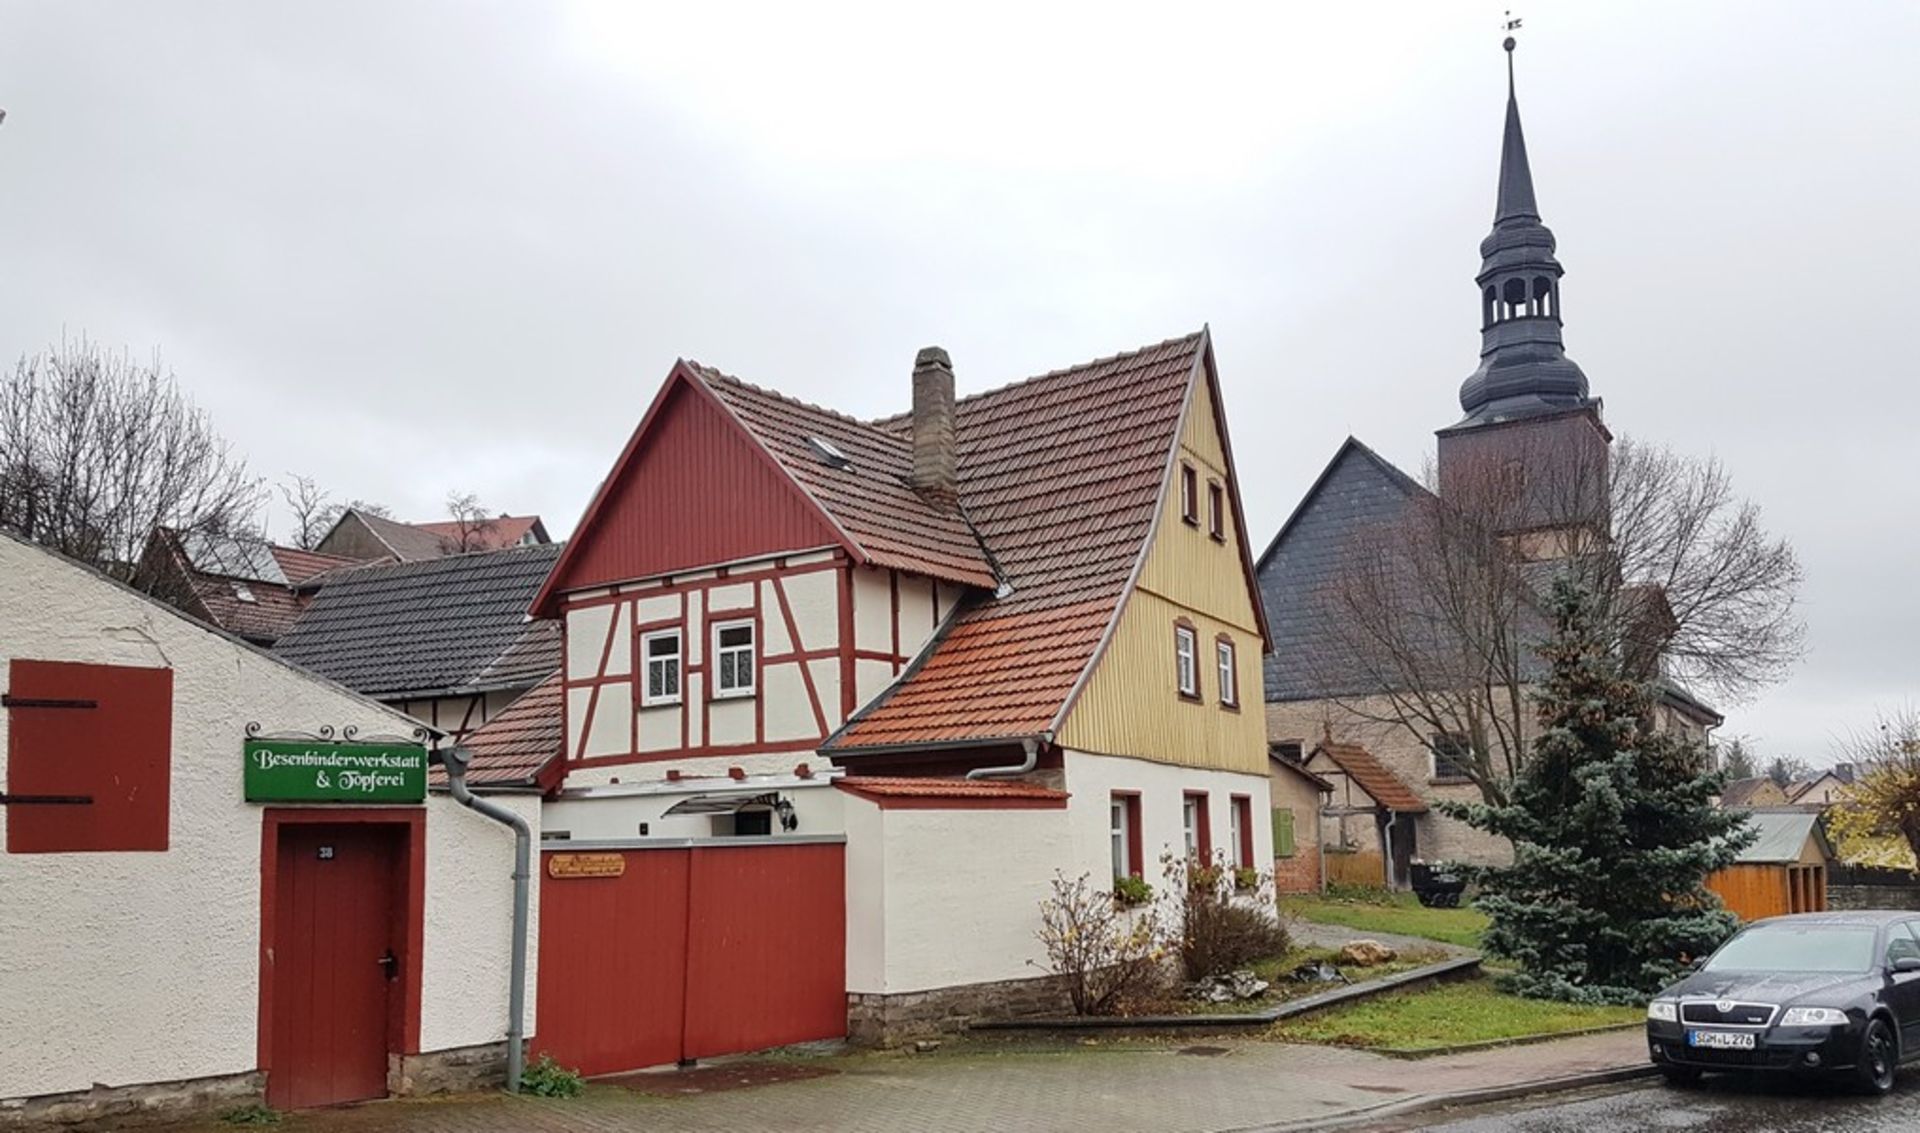 Two Storey Family Home in Sudharz, Germany only 10% BUYER'S PREMIUM TODAY - Image 44 of 51